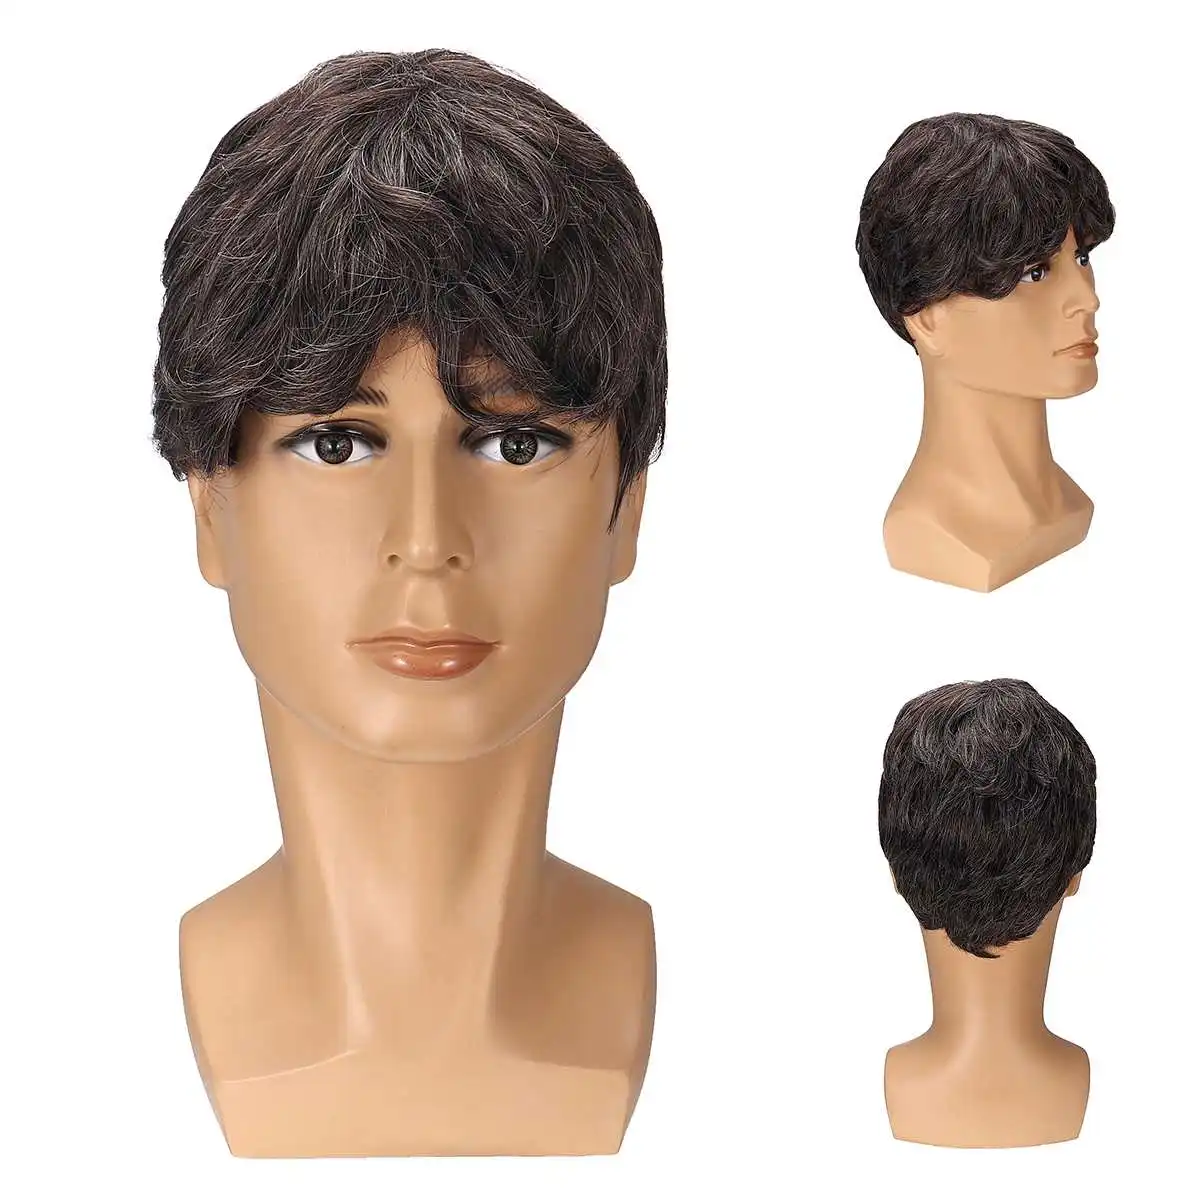 Us 8 99 50 Off High Temperature Fiber Mannequin Curly Hair Diy Styling Training Head Model Men Wig Salon Hairdressing Weaving Cap In Figurines